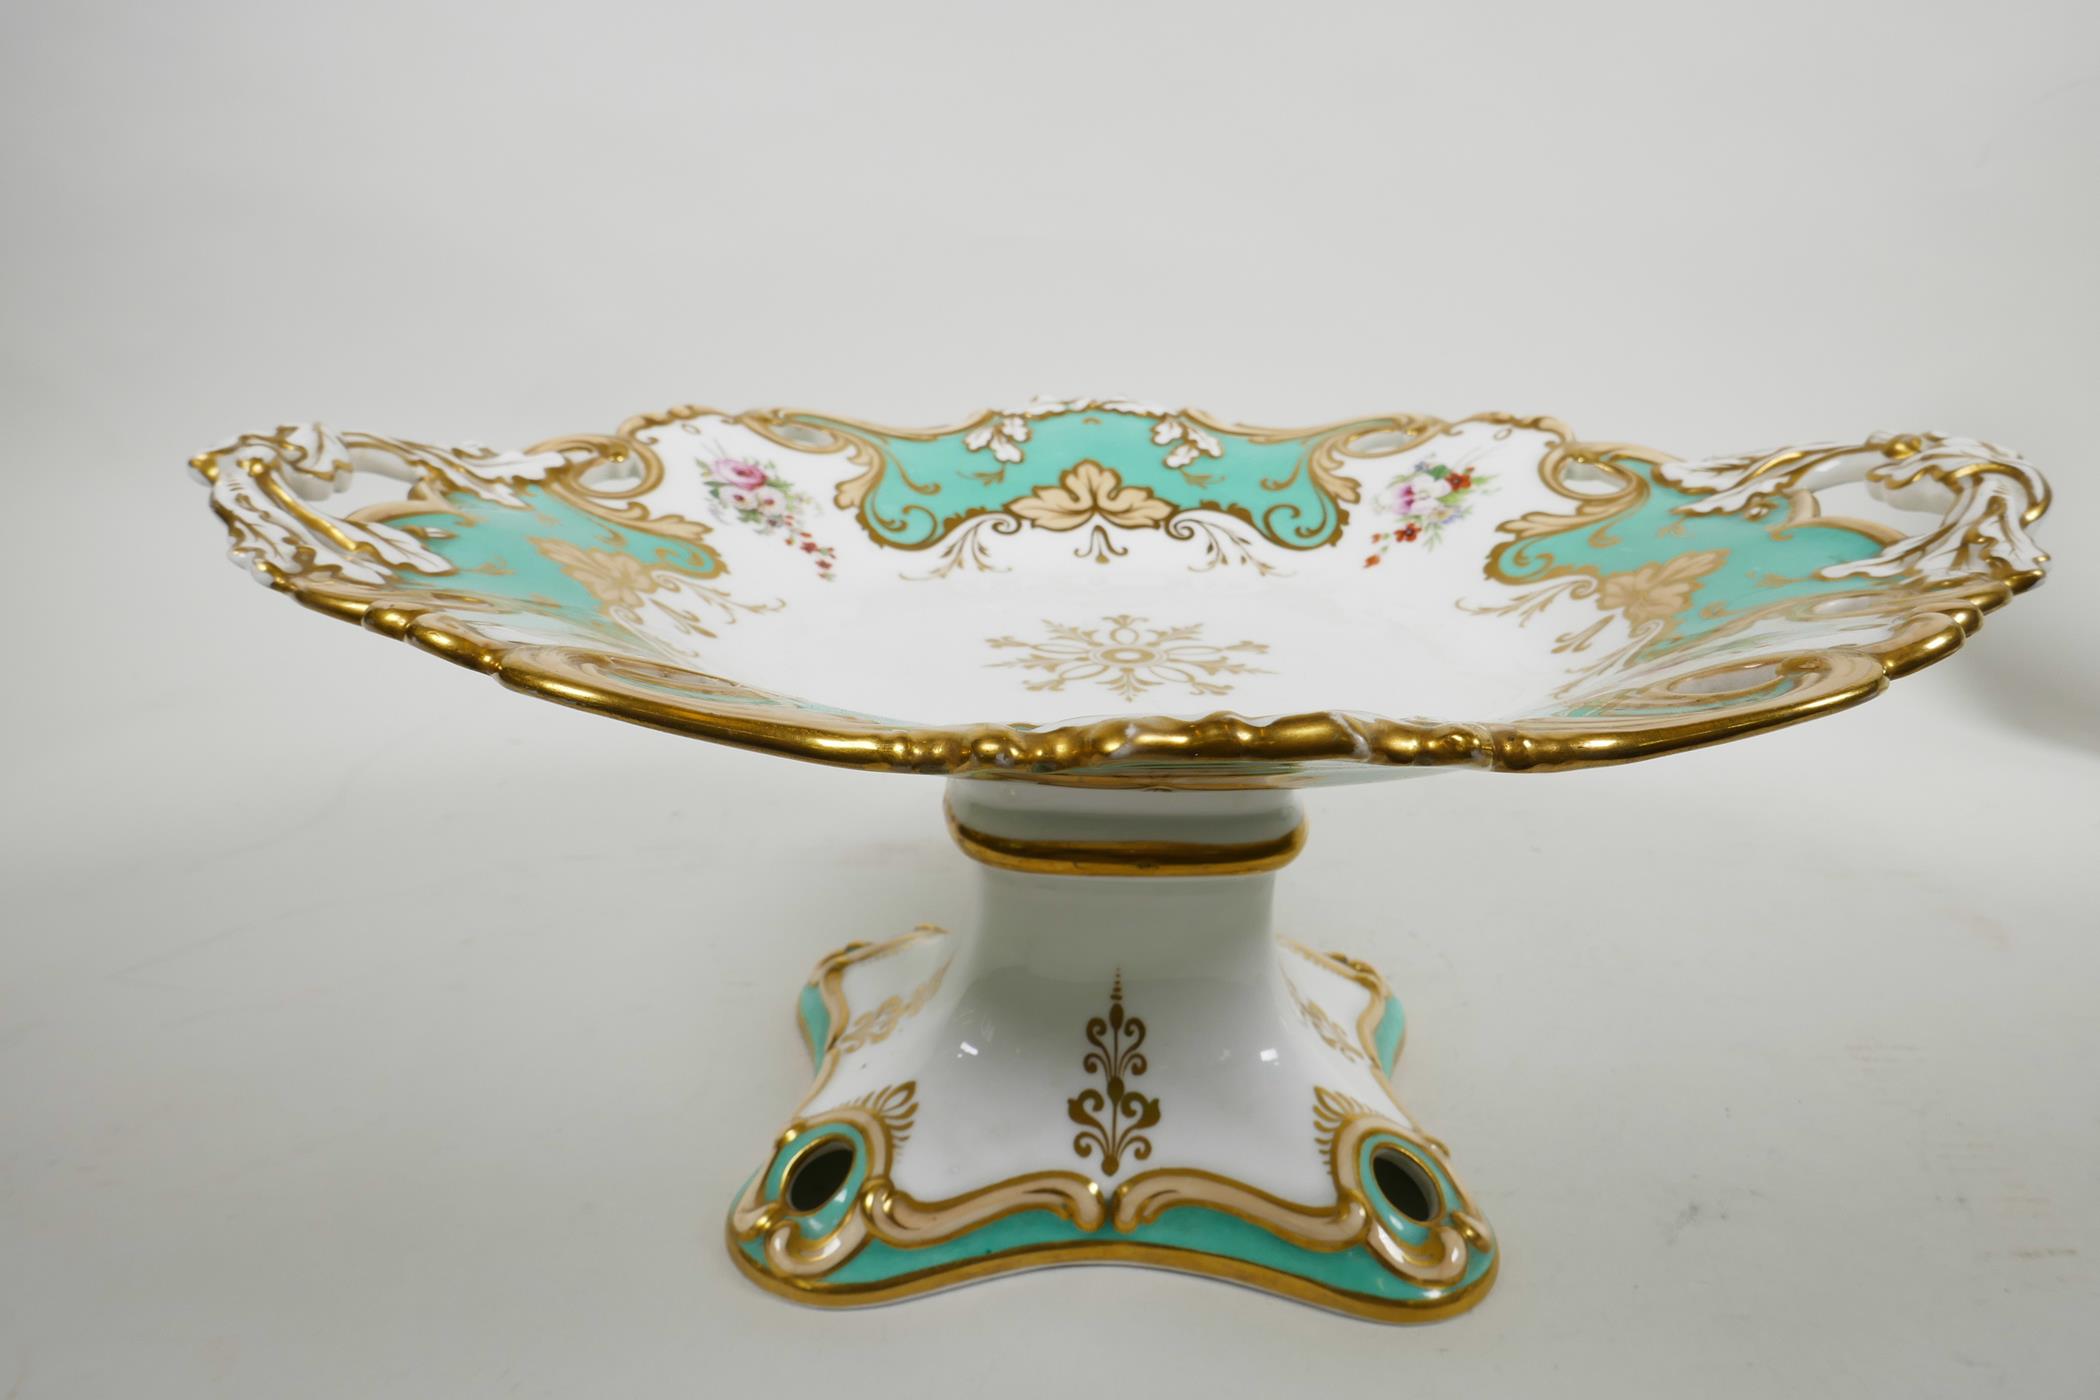 A rare 1840s Ridgway part dessert service with pedestal comport and four matching square dessert - Image 5 of 9